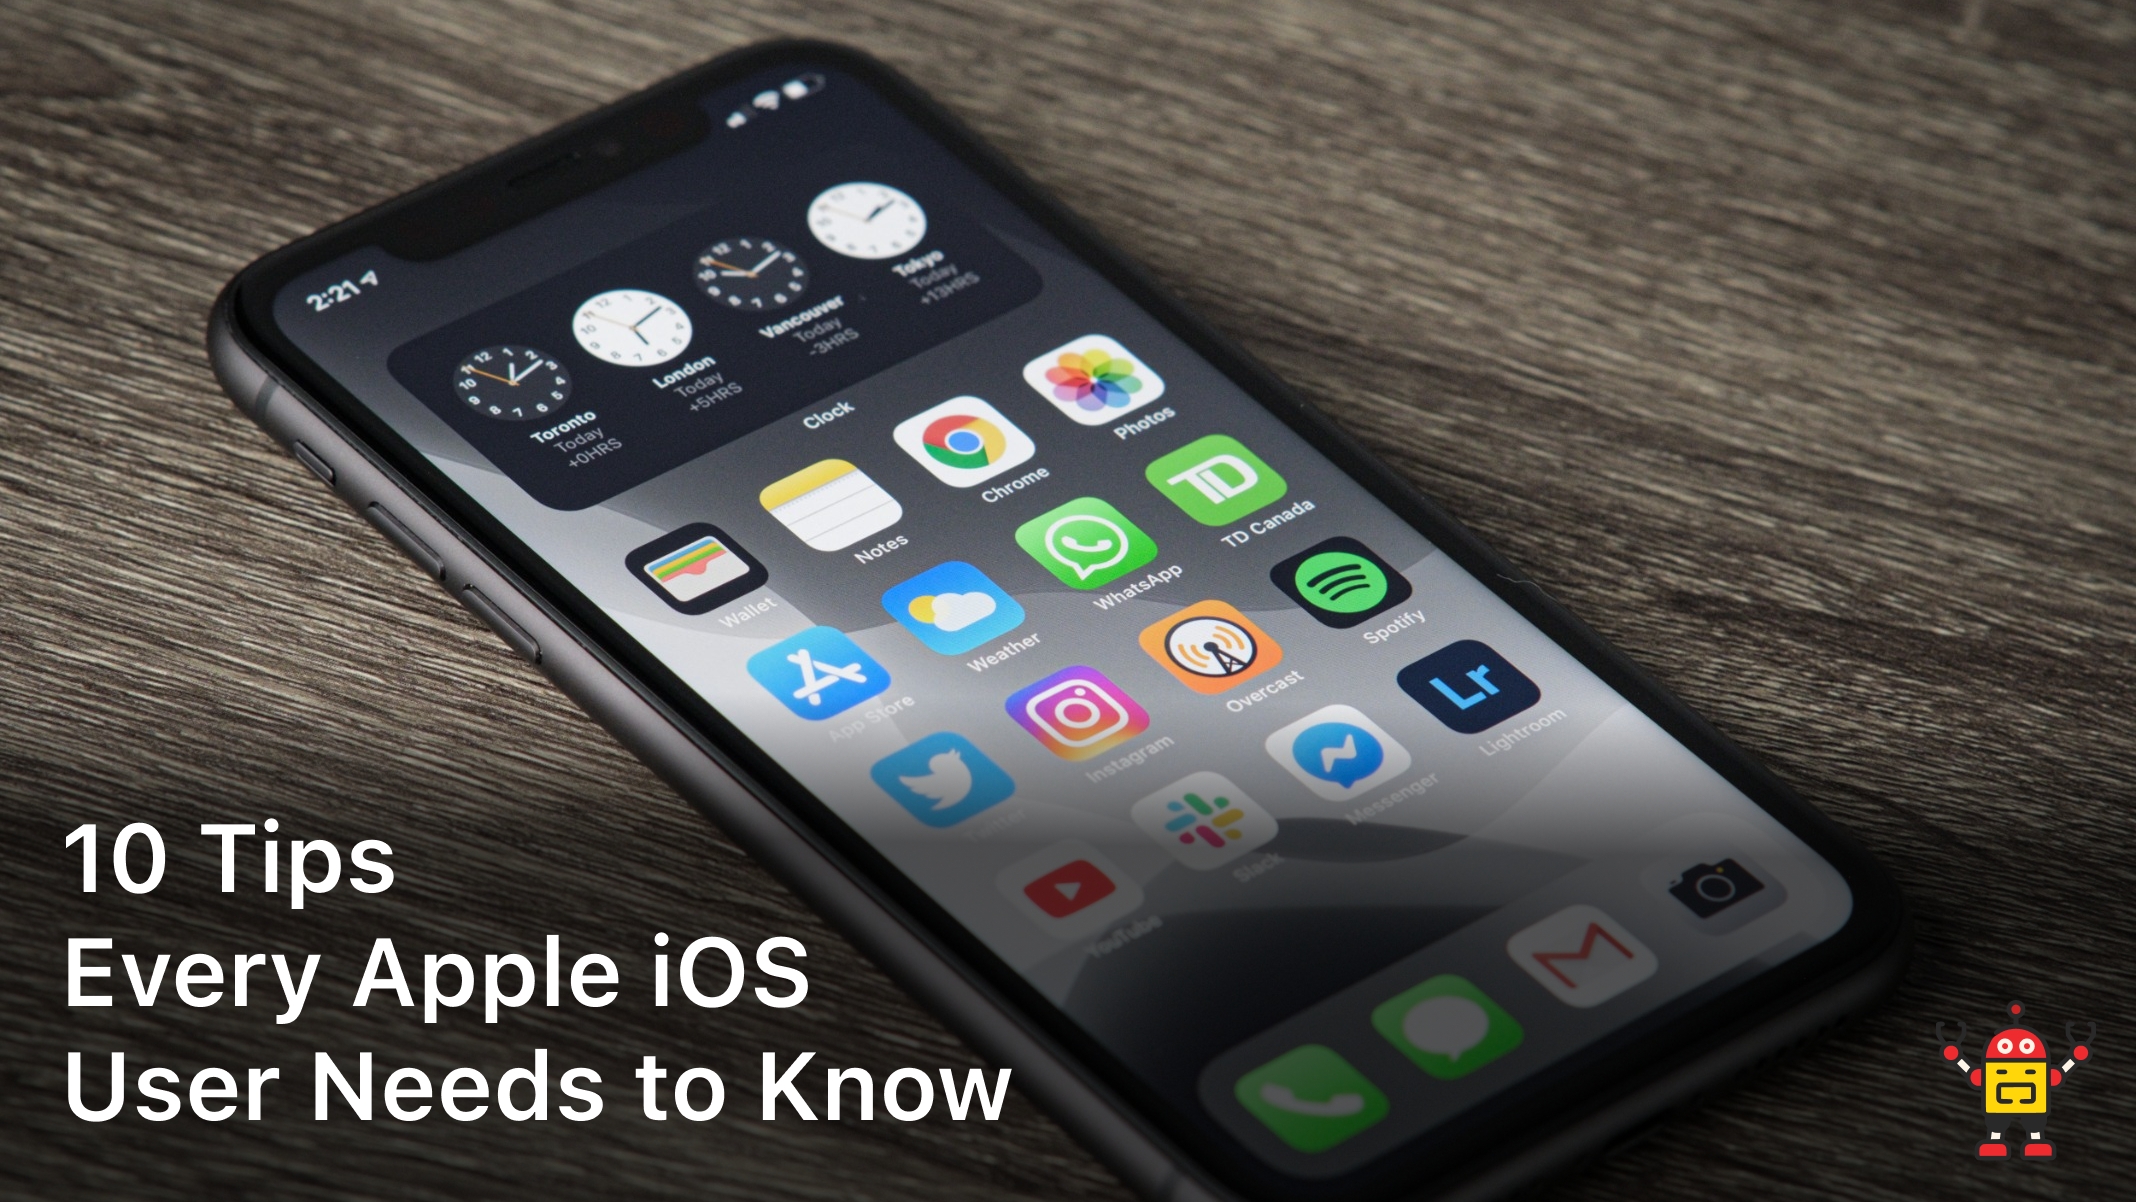 10 Tips Every Apple iOS User Needs to Know